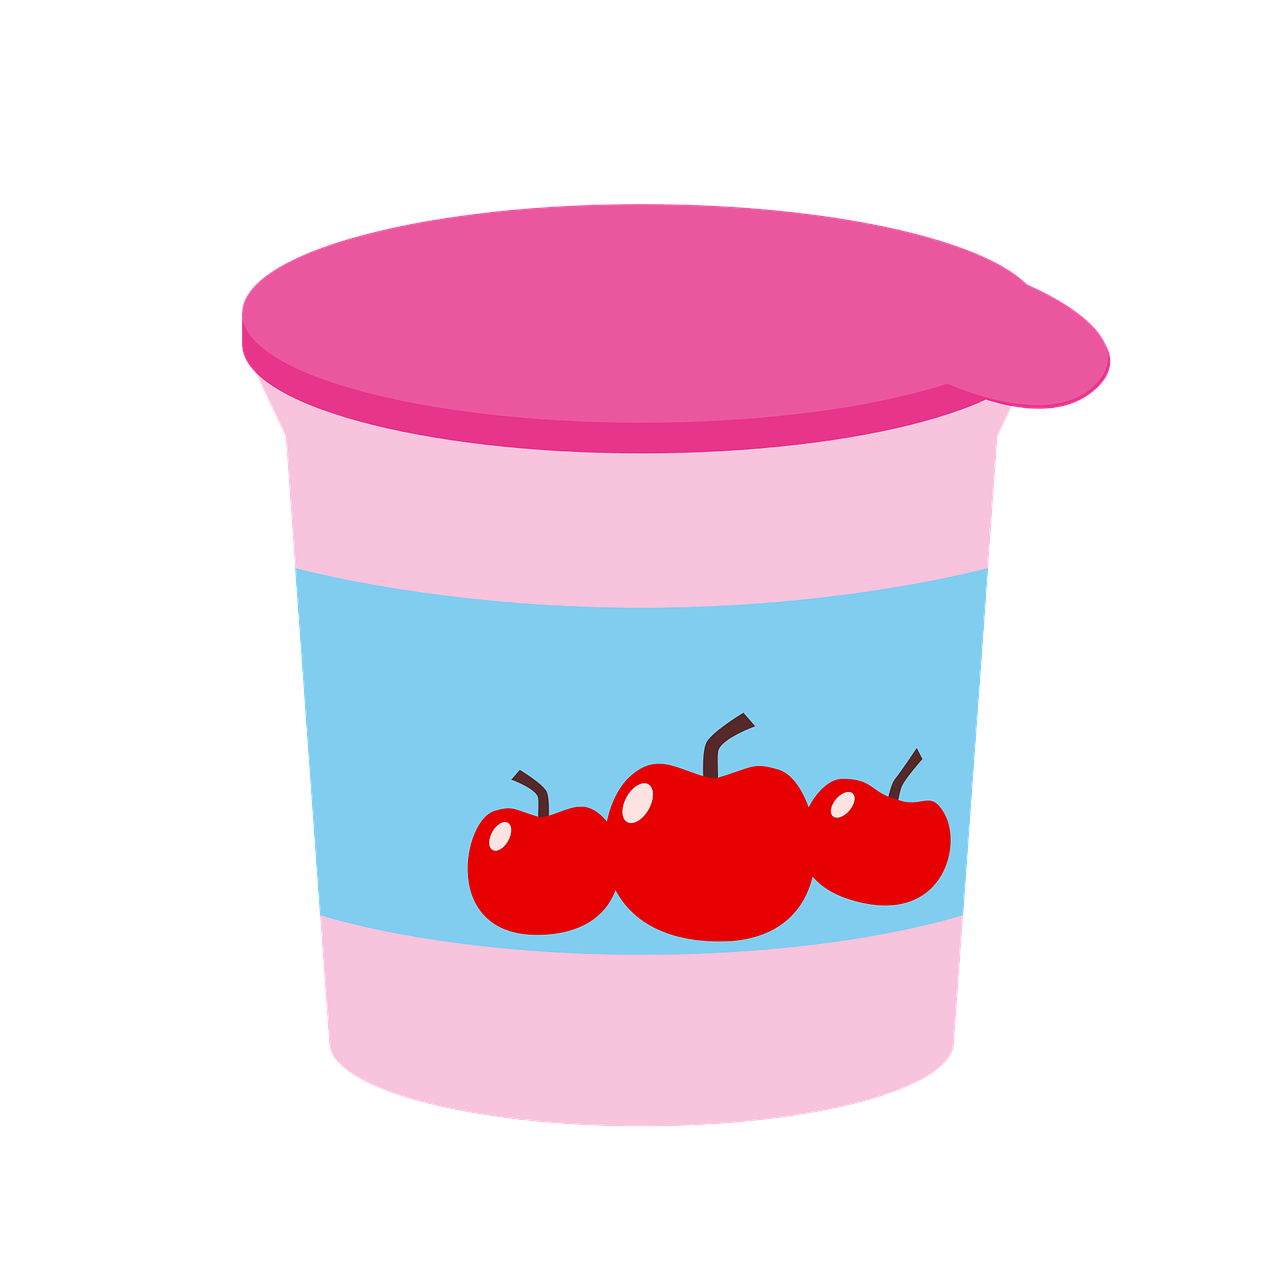 Drawing of a yogurt carton with a bright pink lid, and cherries on the side.